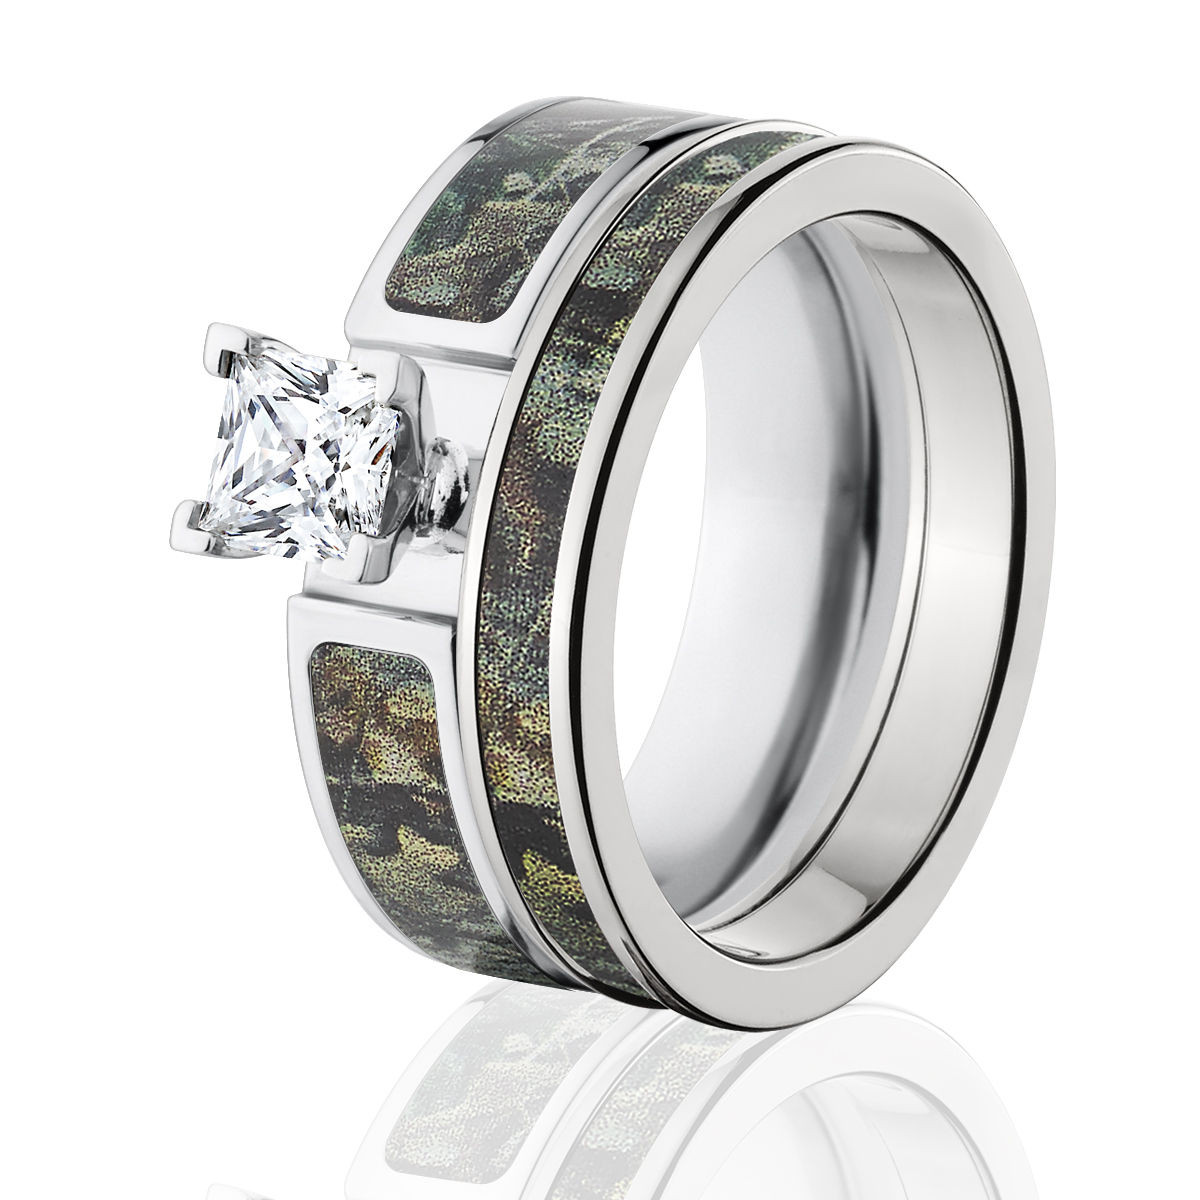 Camouflage Wedding Ring Sets
 Timber Camo Bridal Set Womens Camouflage Wedding Ring Set